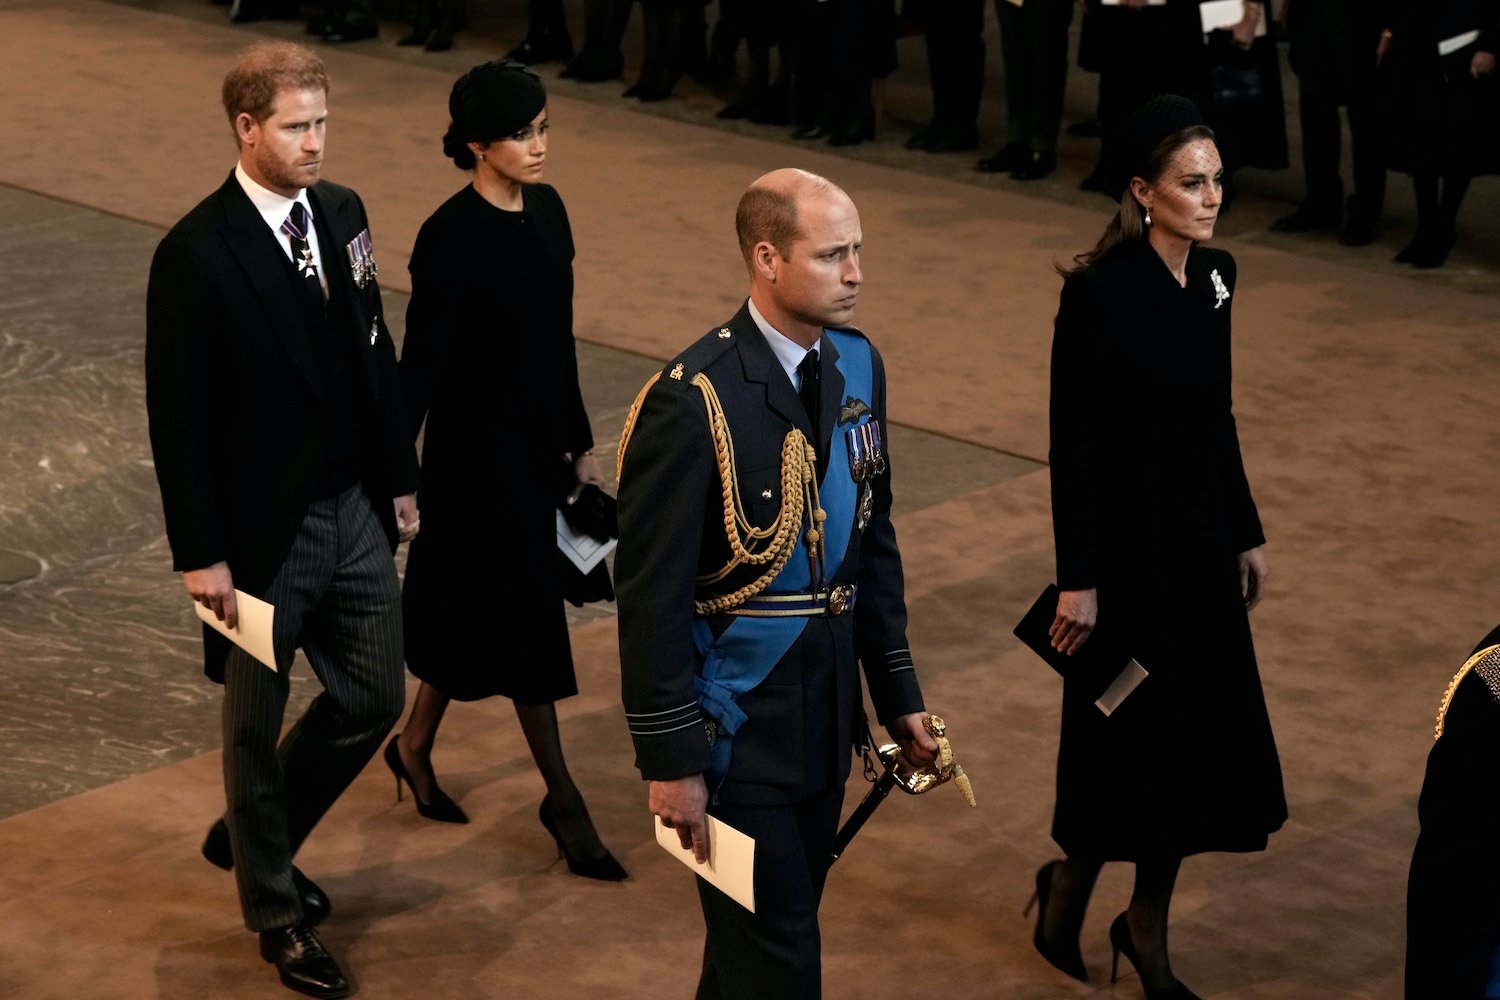 Prince Harry and Meghan Markle body language compared to Prince William and Kate Middleton following service for the queen